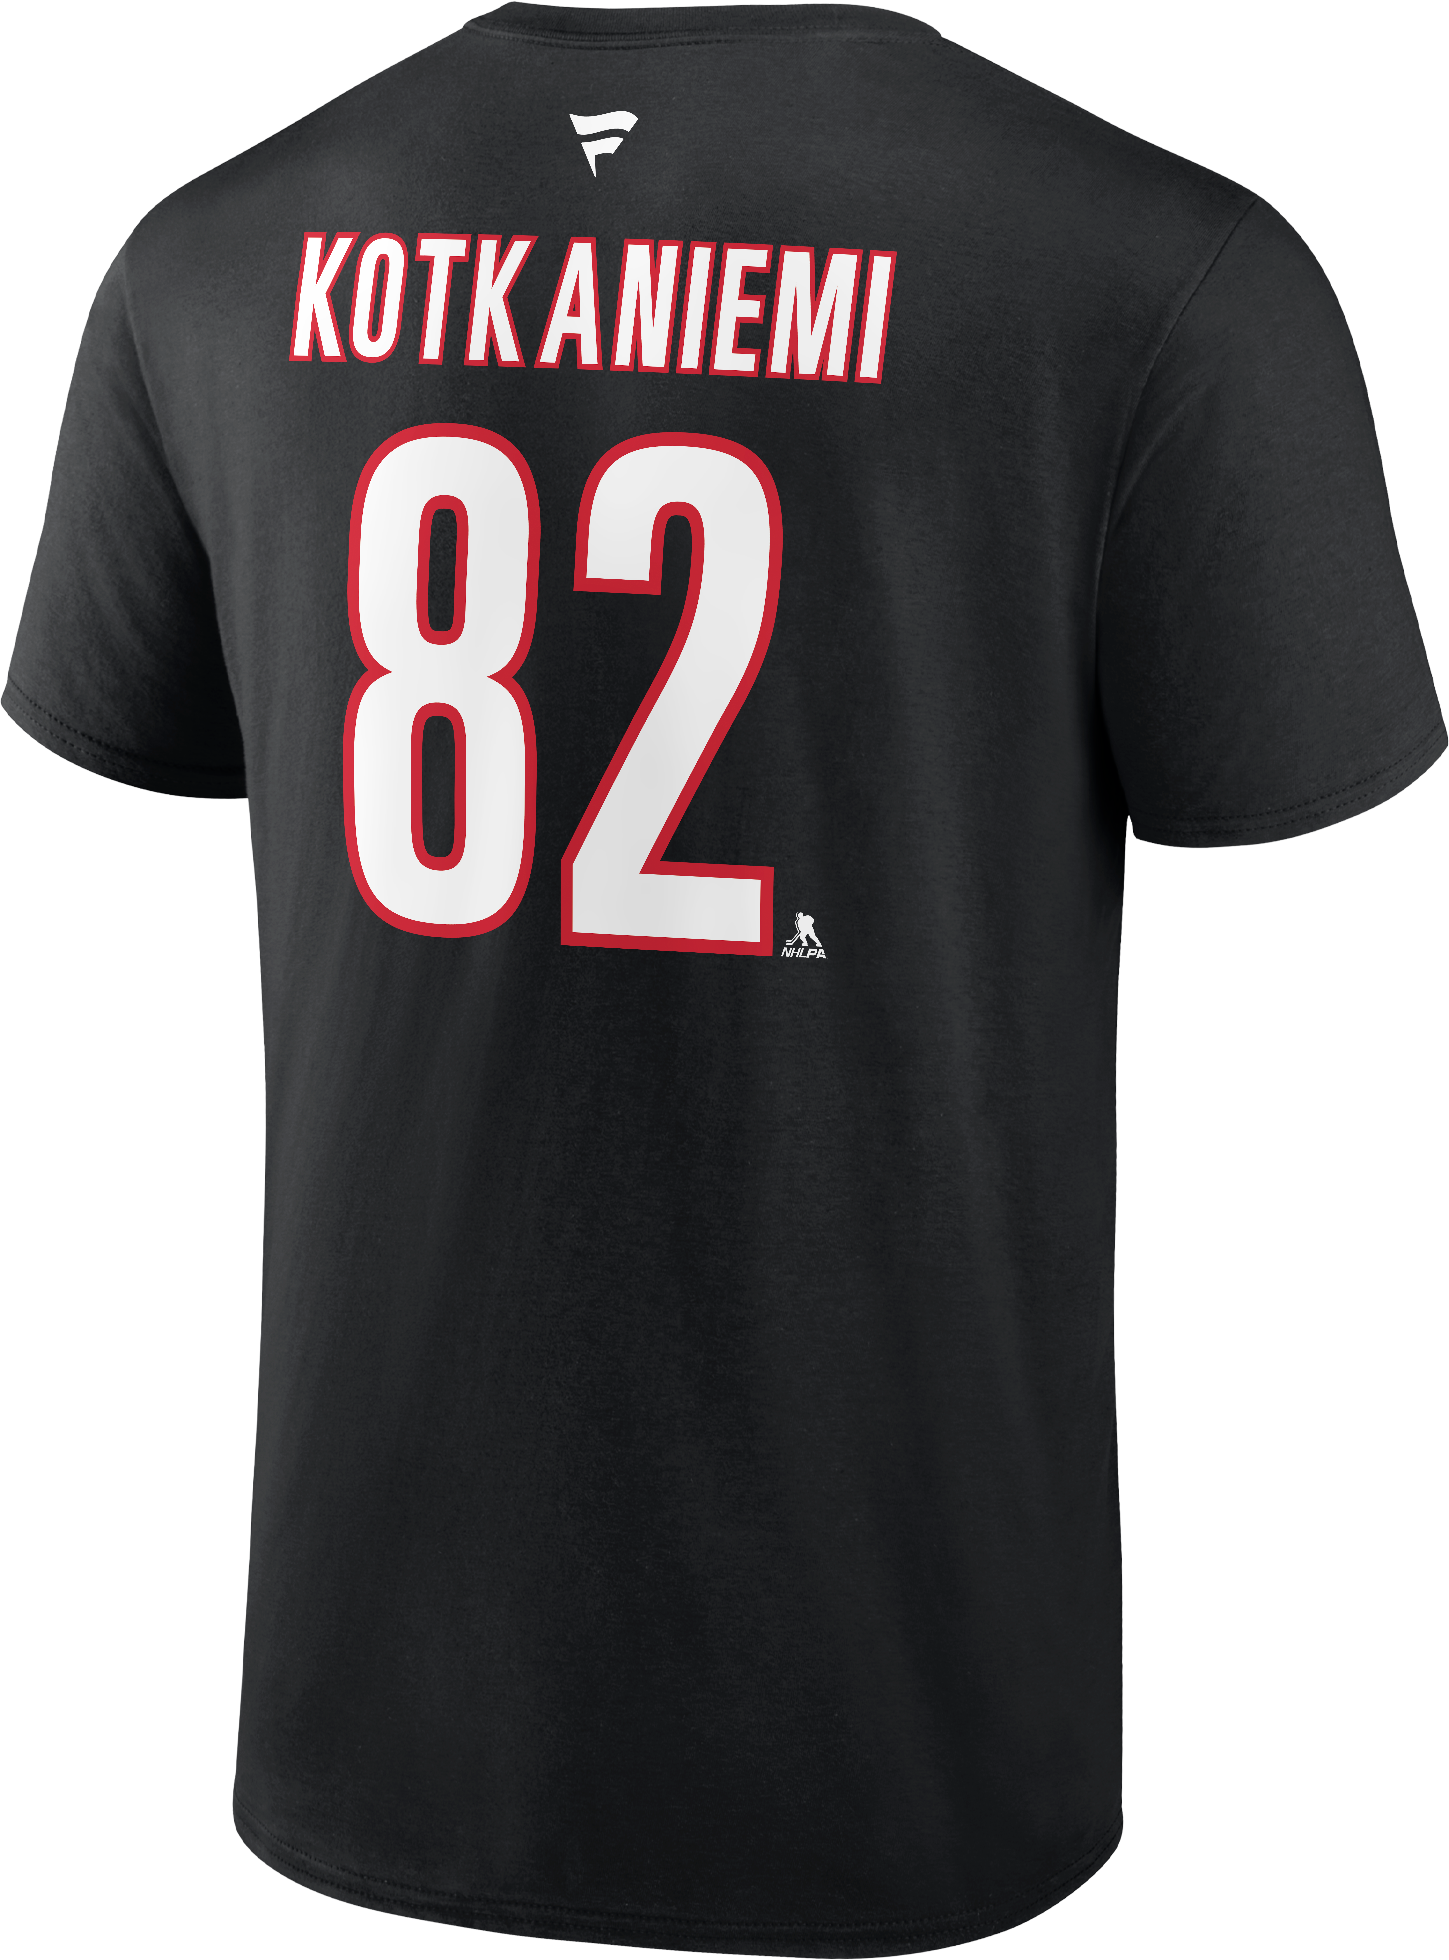 Back: Black tee with Kotkaniemi #82 in white and red on back with Fanatics logo at neck